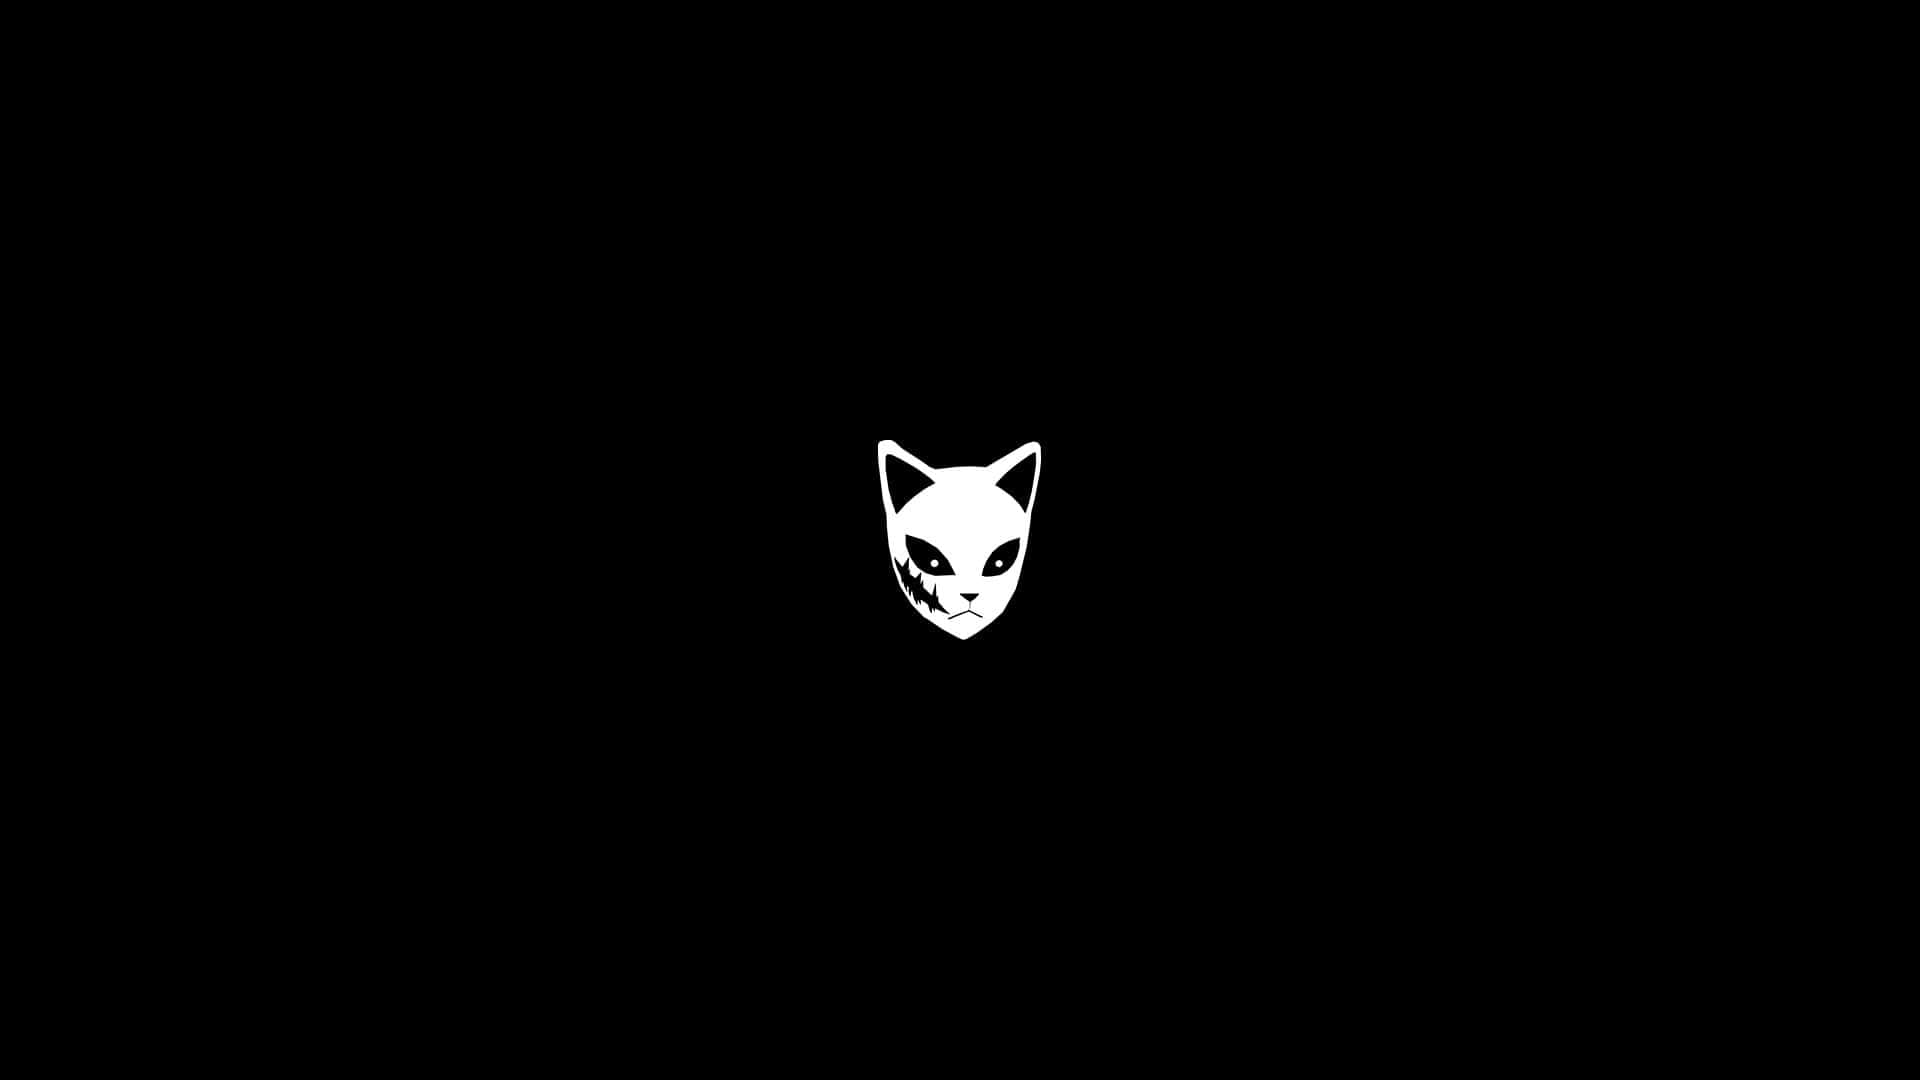 A White Cat Logo On A Black Background Wallpaper